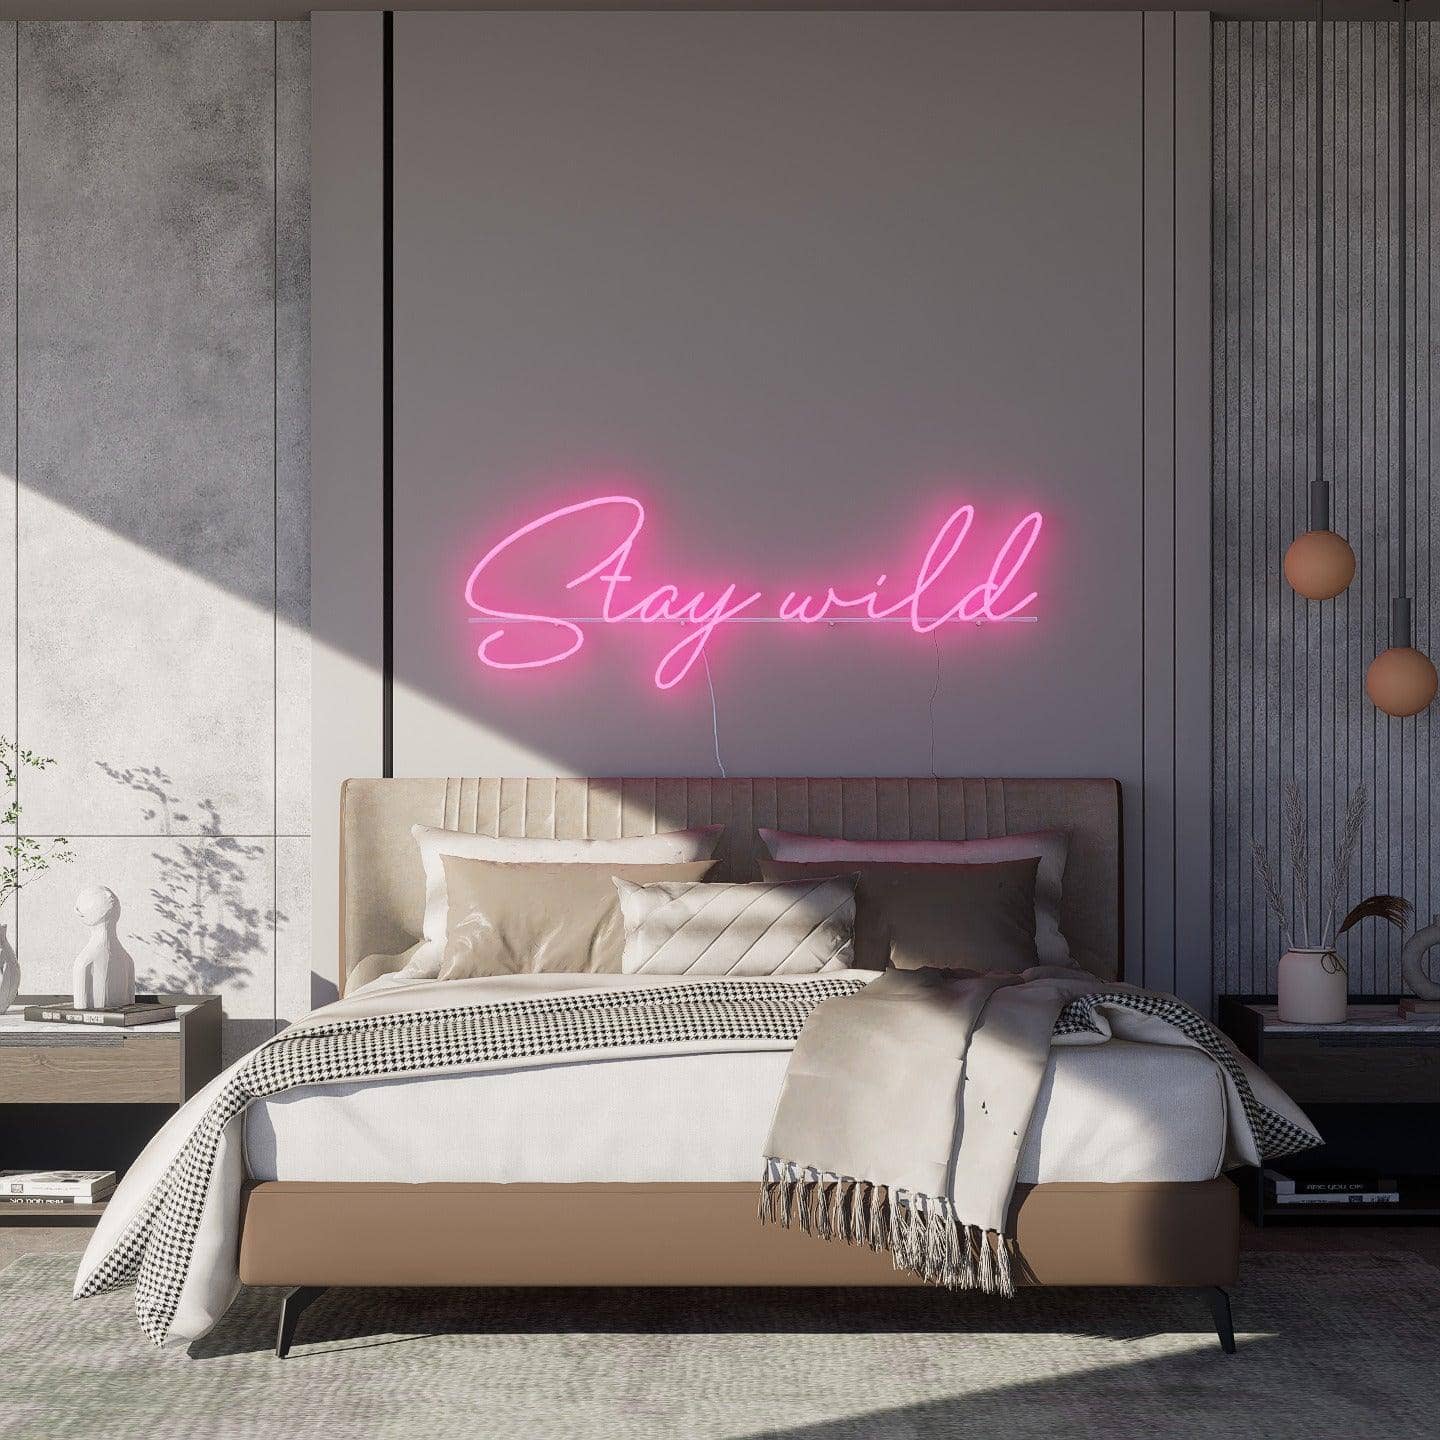 light-up-pink-neon-lights-during-the-day-and-hang-on-the-wall-for-display-stay-wild